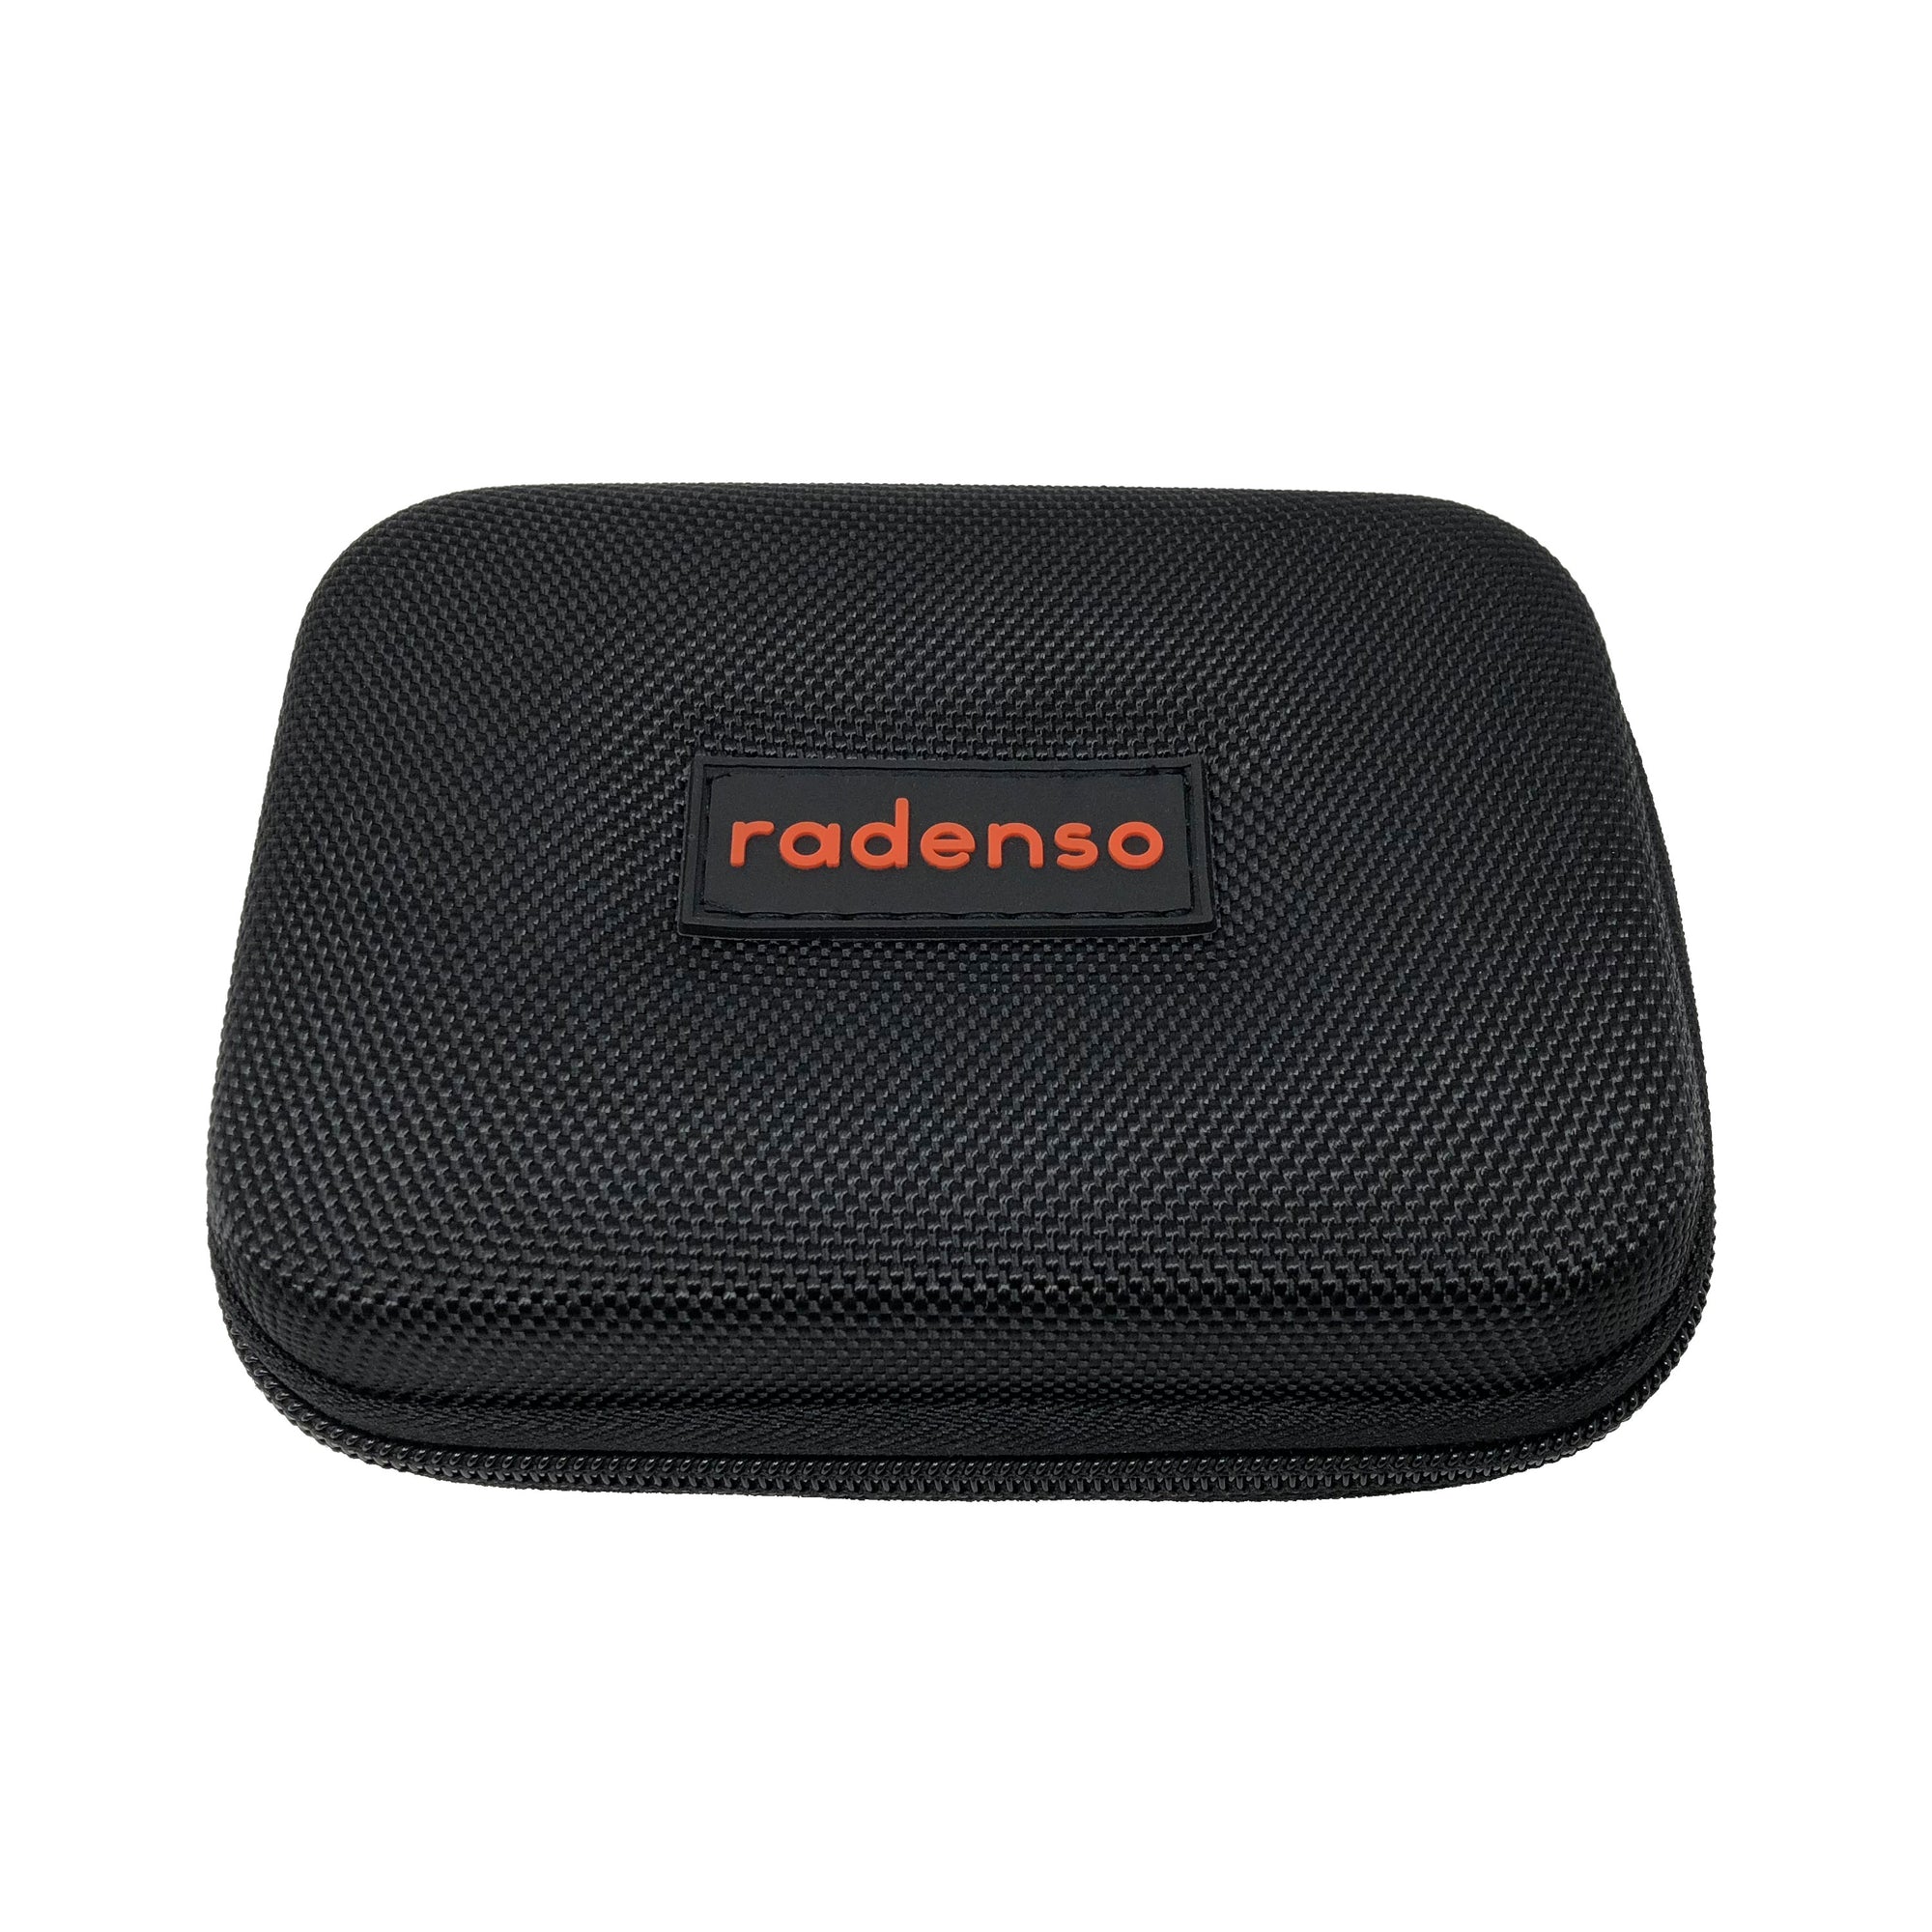 Radenso Carrying Case